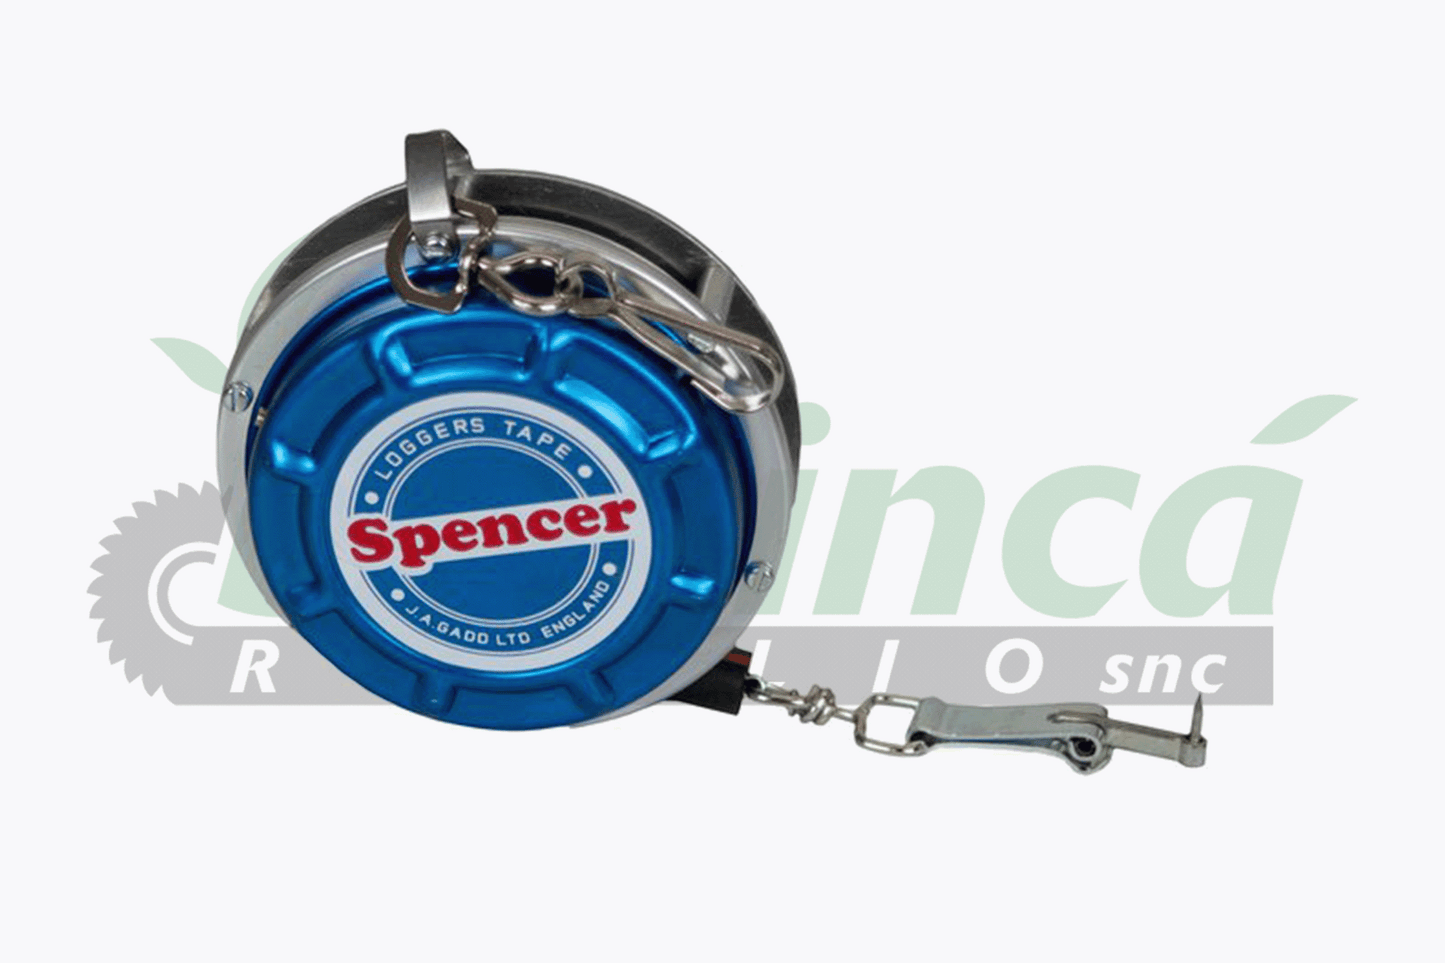 Spencer tape measure various sizes